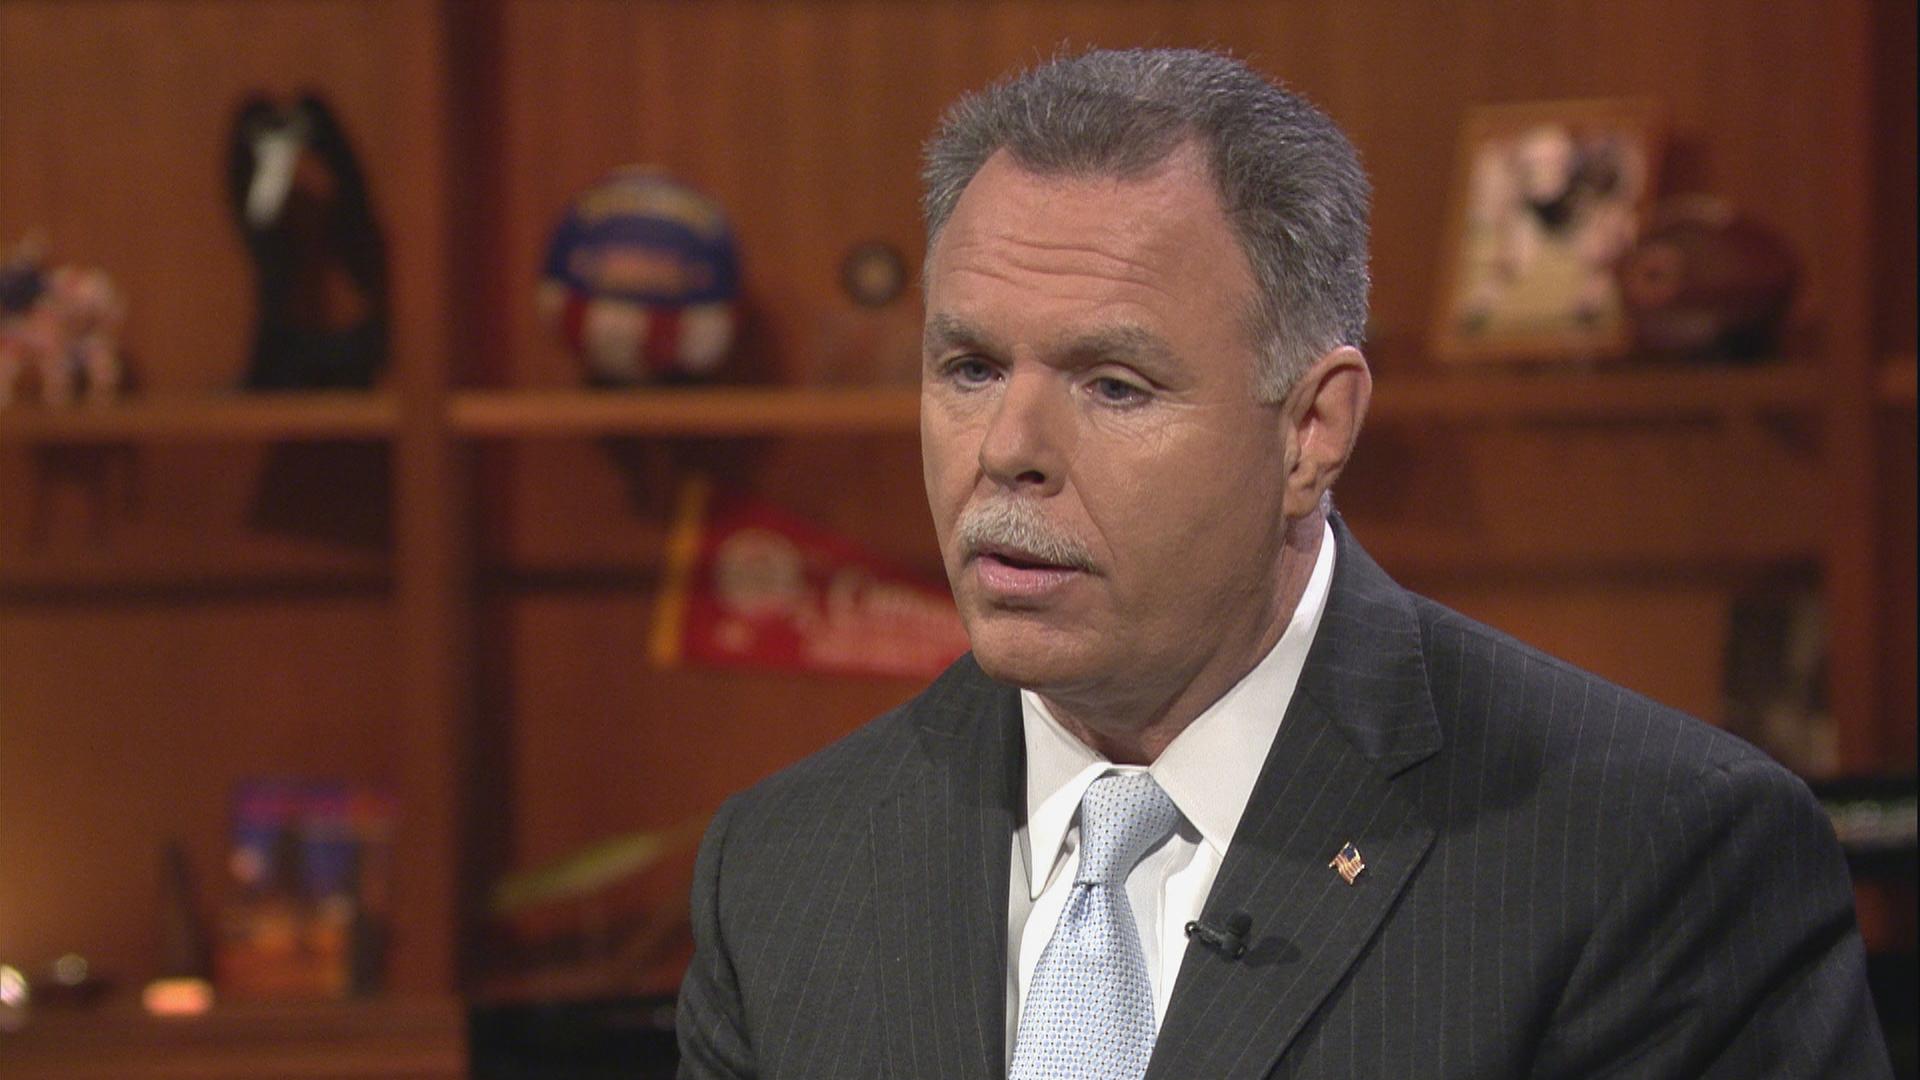 Garry McCarthy appears on “Chicago Tonight” on Feb. 20, 2018.